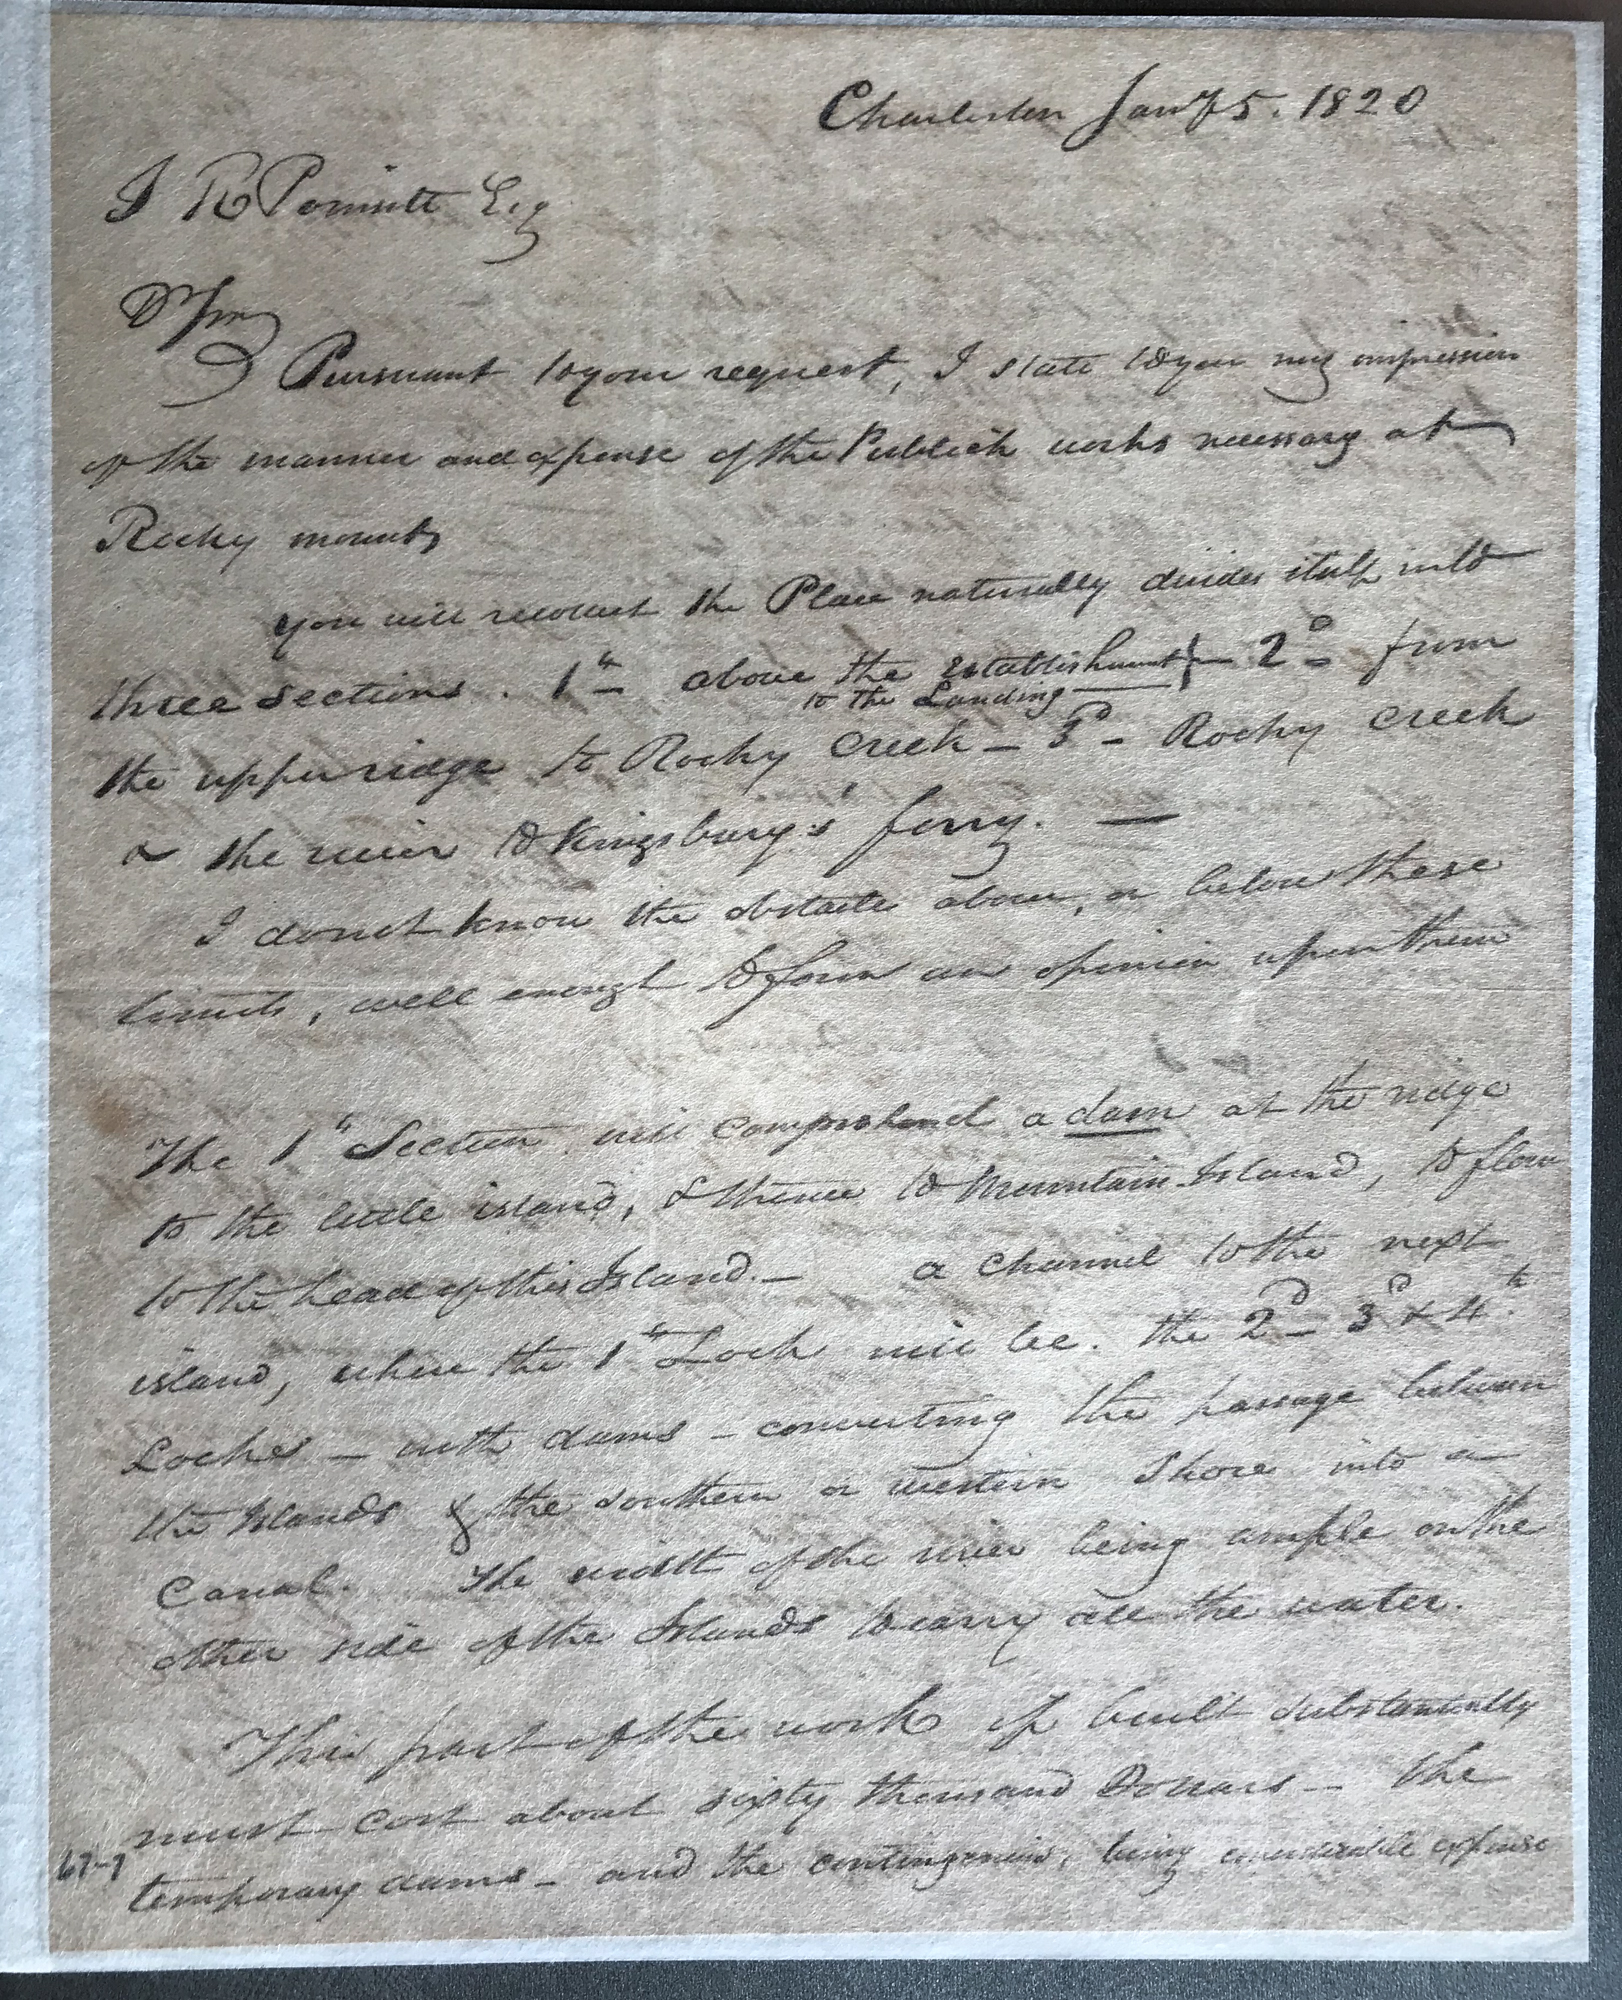 CONTRACT FOR CONSTRUCTION - 1820, p. 1